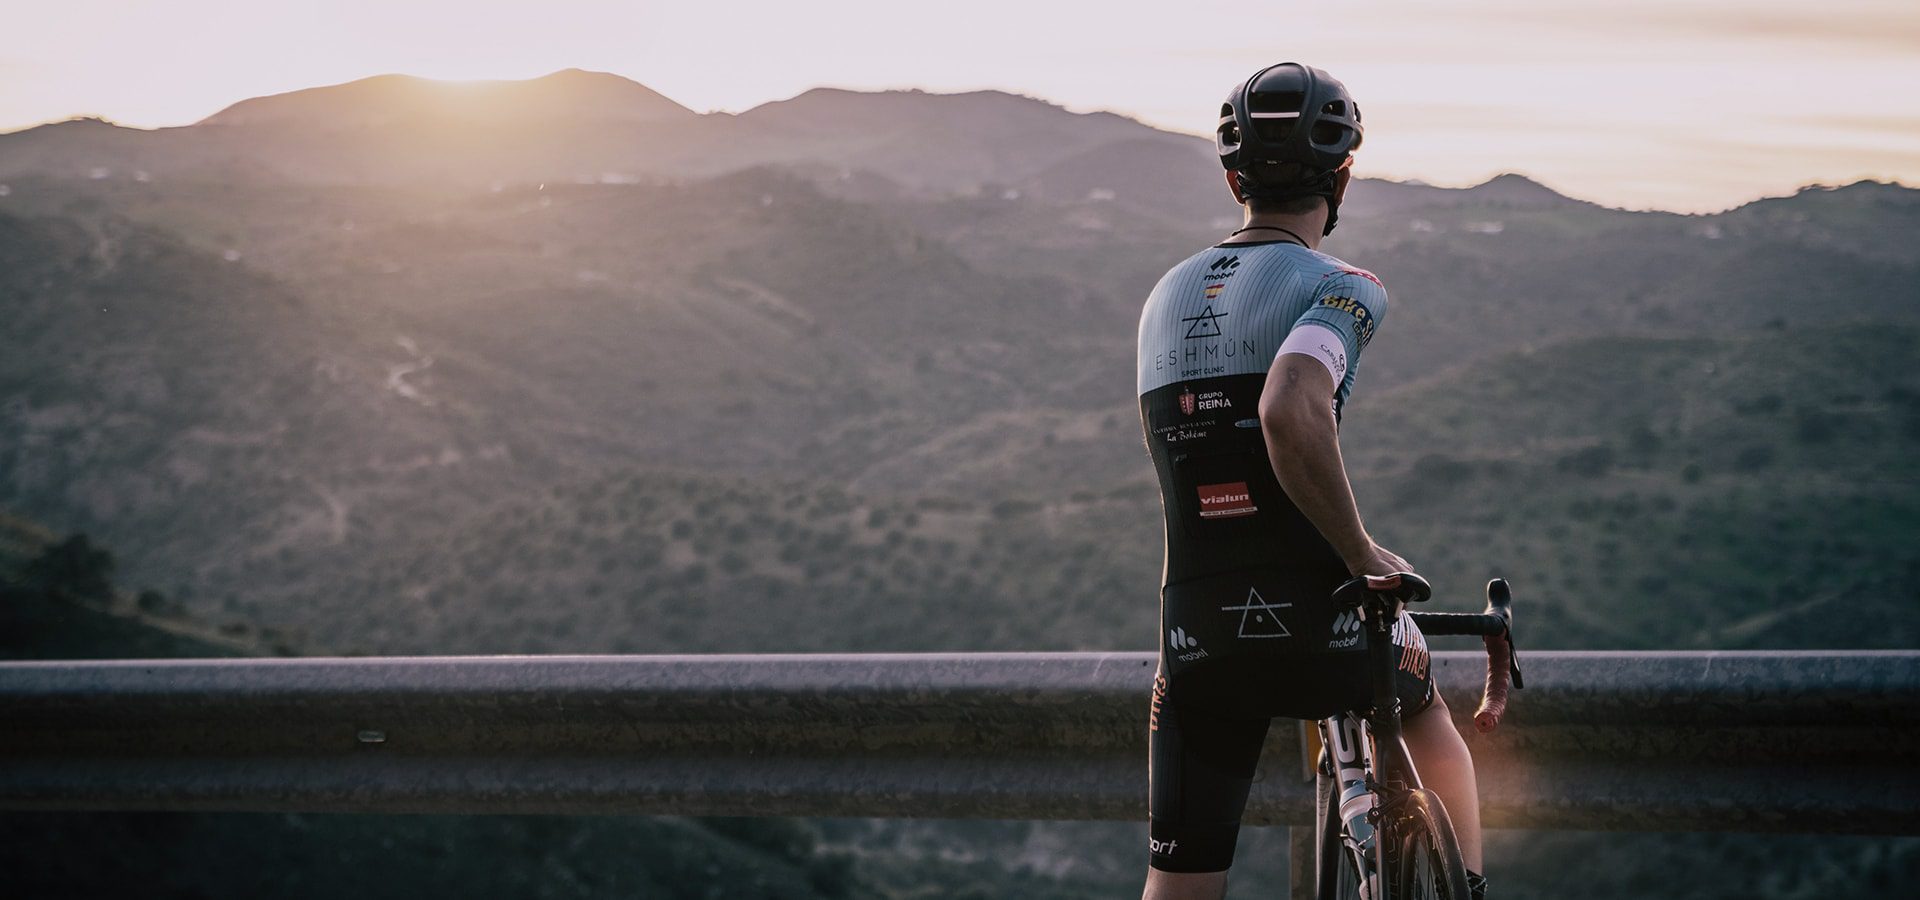 As demand for bikes increases, online retailer Cycling Avenue is thriving